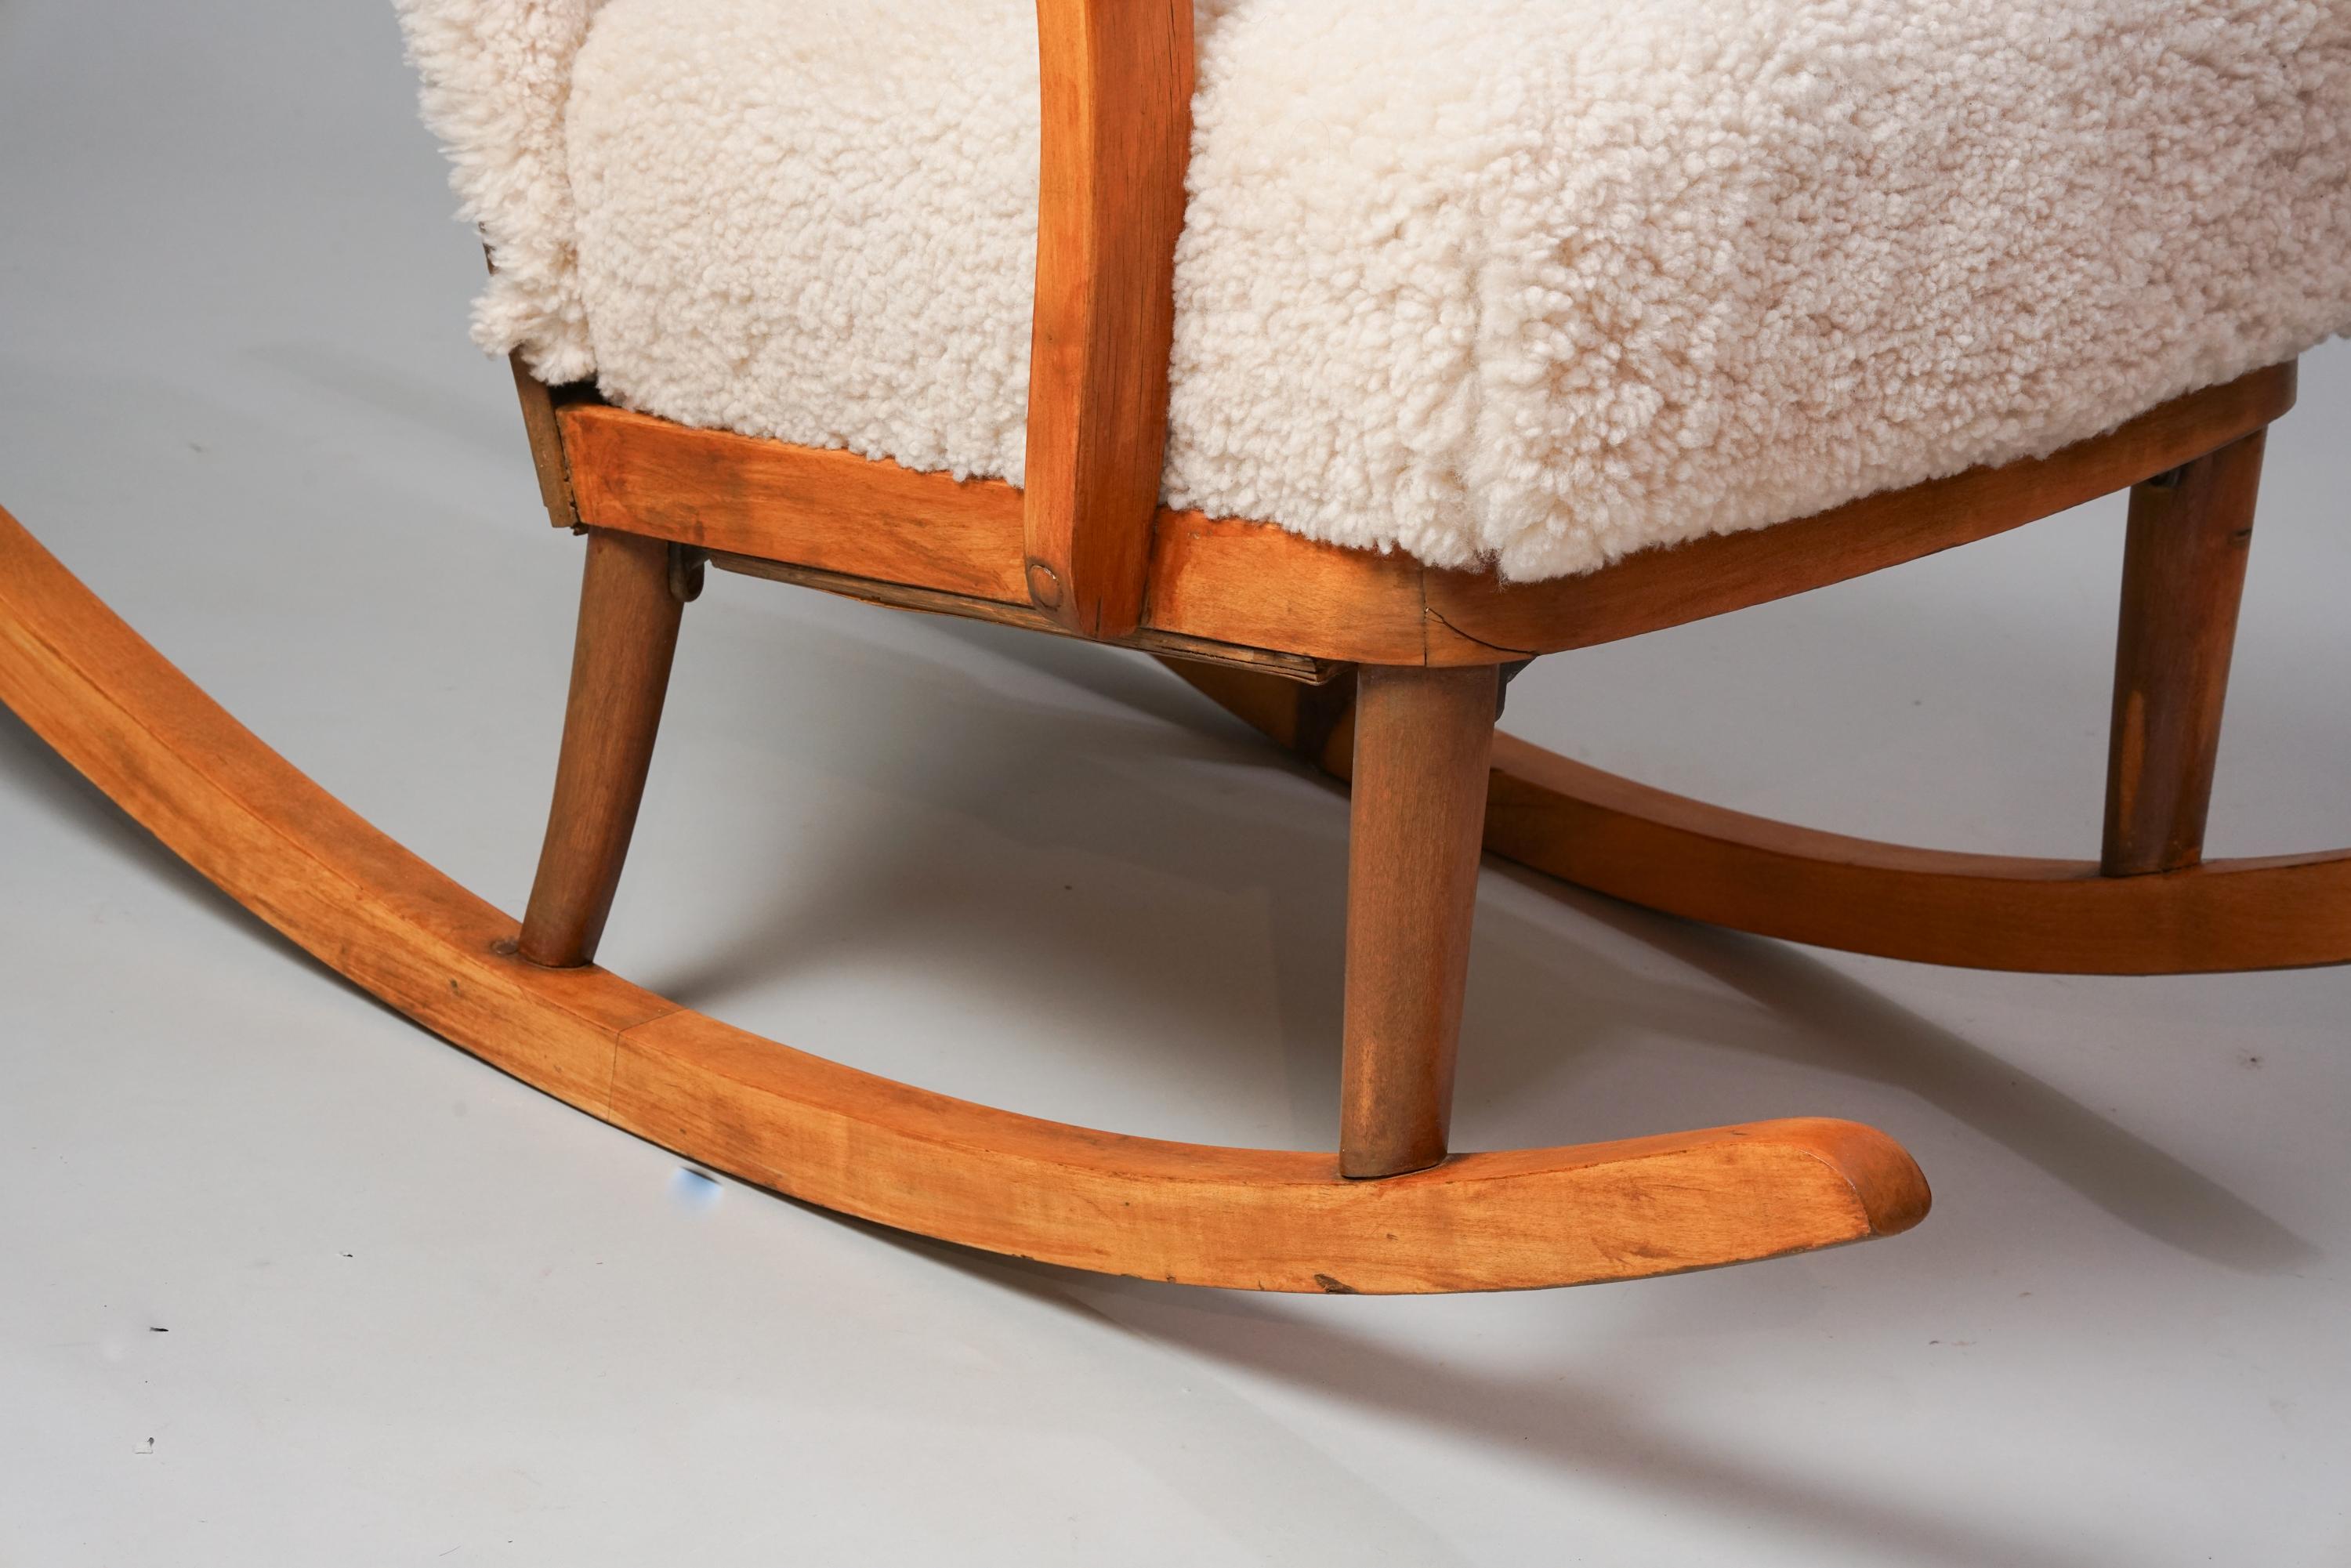 Rare Werner West rocking chair, 1930/1940s. Birch frame with sheepskin upholstery. Good vintage condition, minor patina consistent with age and use. Beautiful and classic Scandinavian Modern -style rocking chair. 
